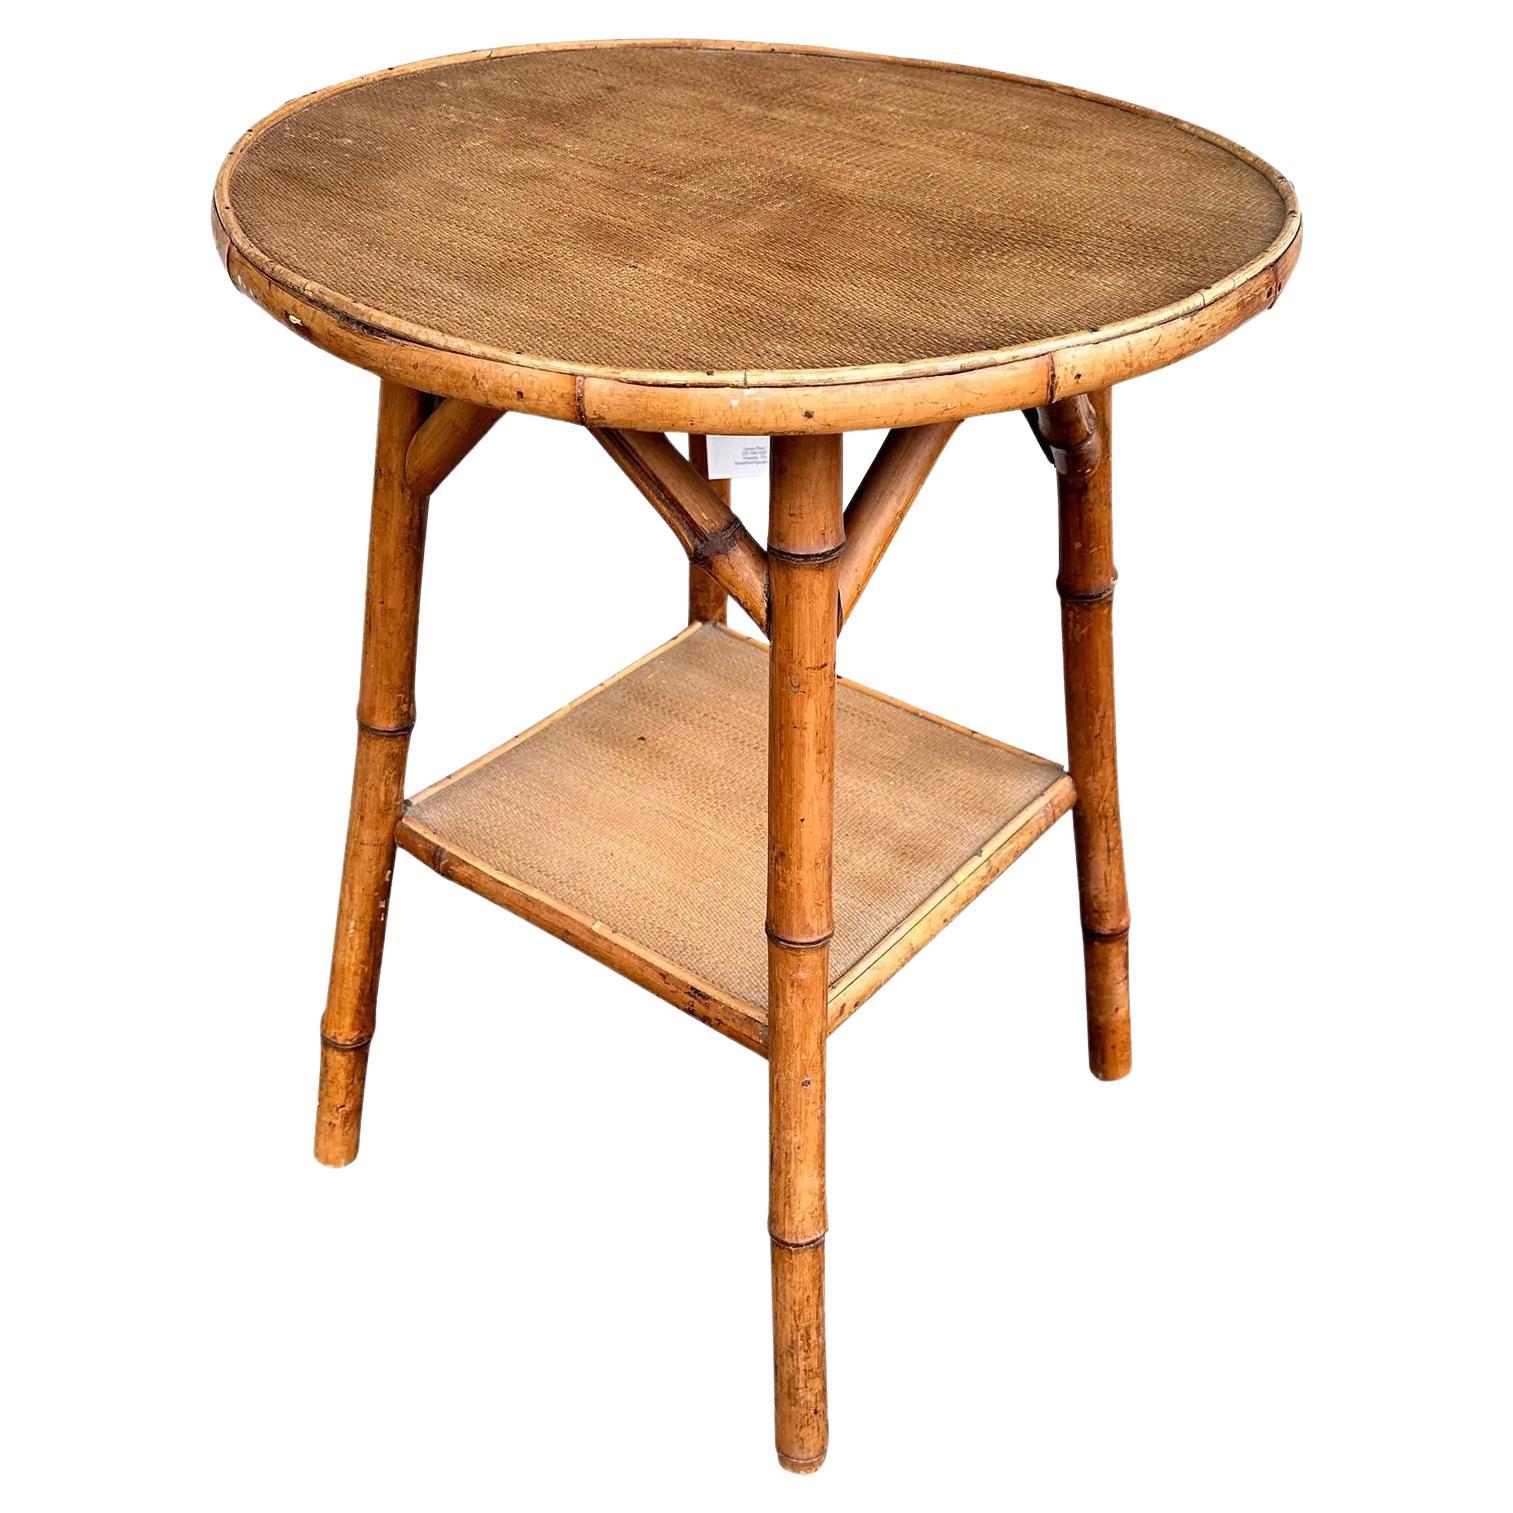 19th Century Side Table English Bamboo